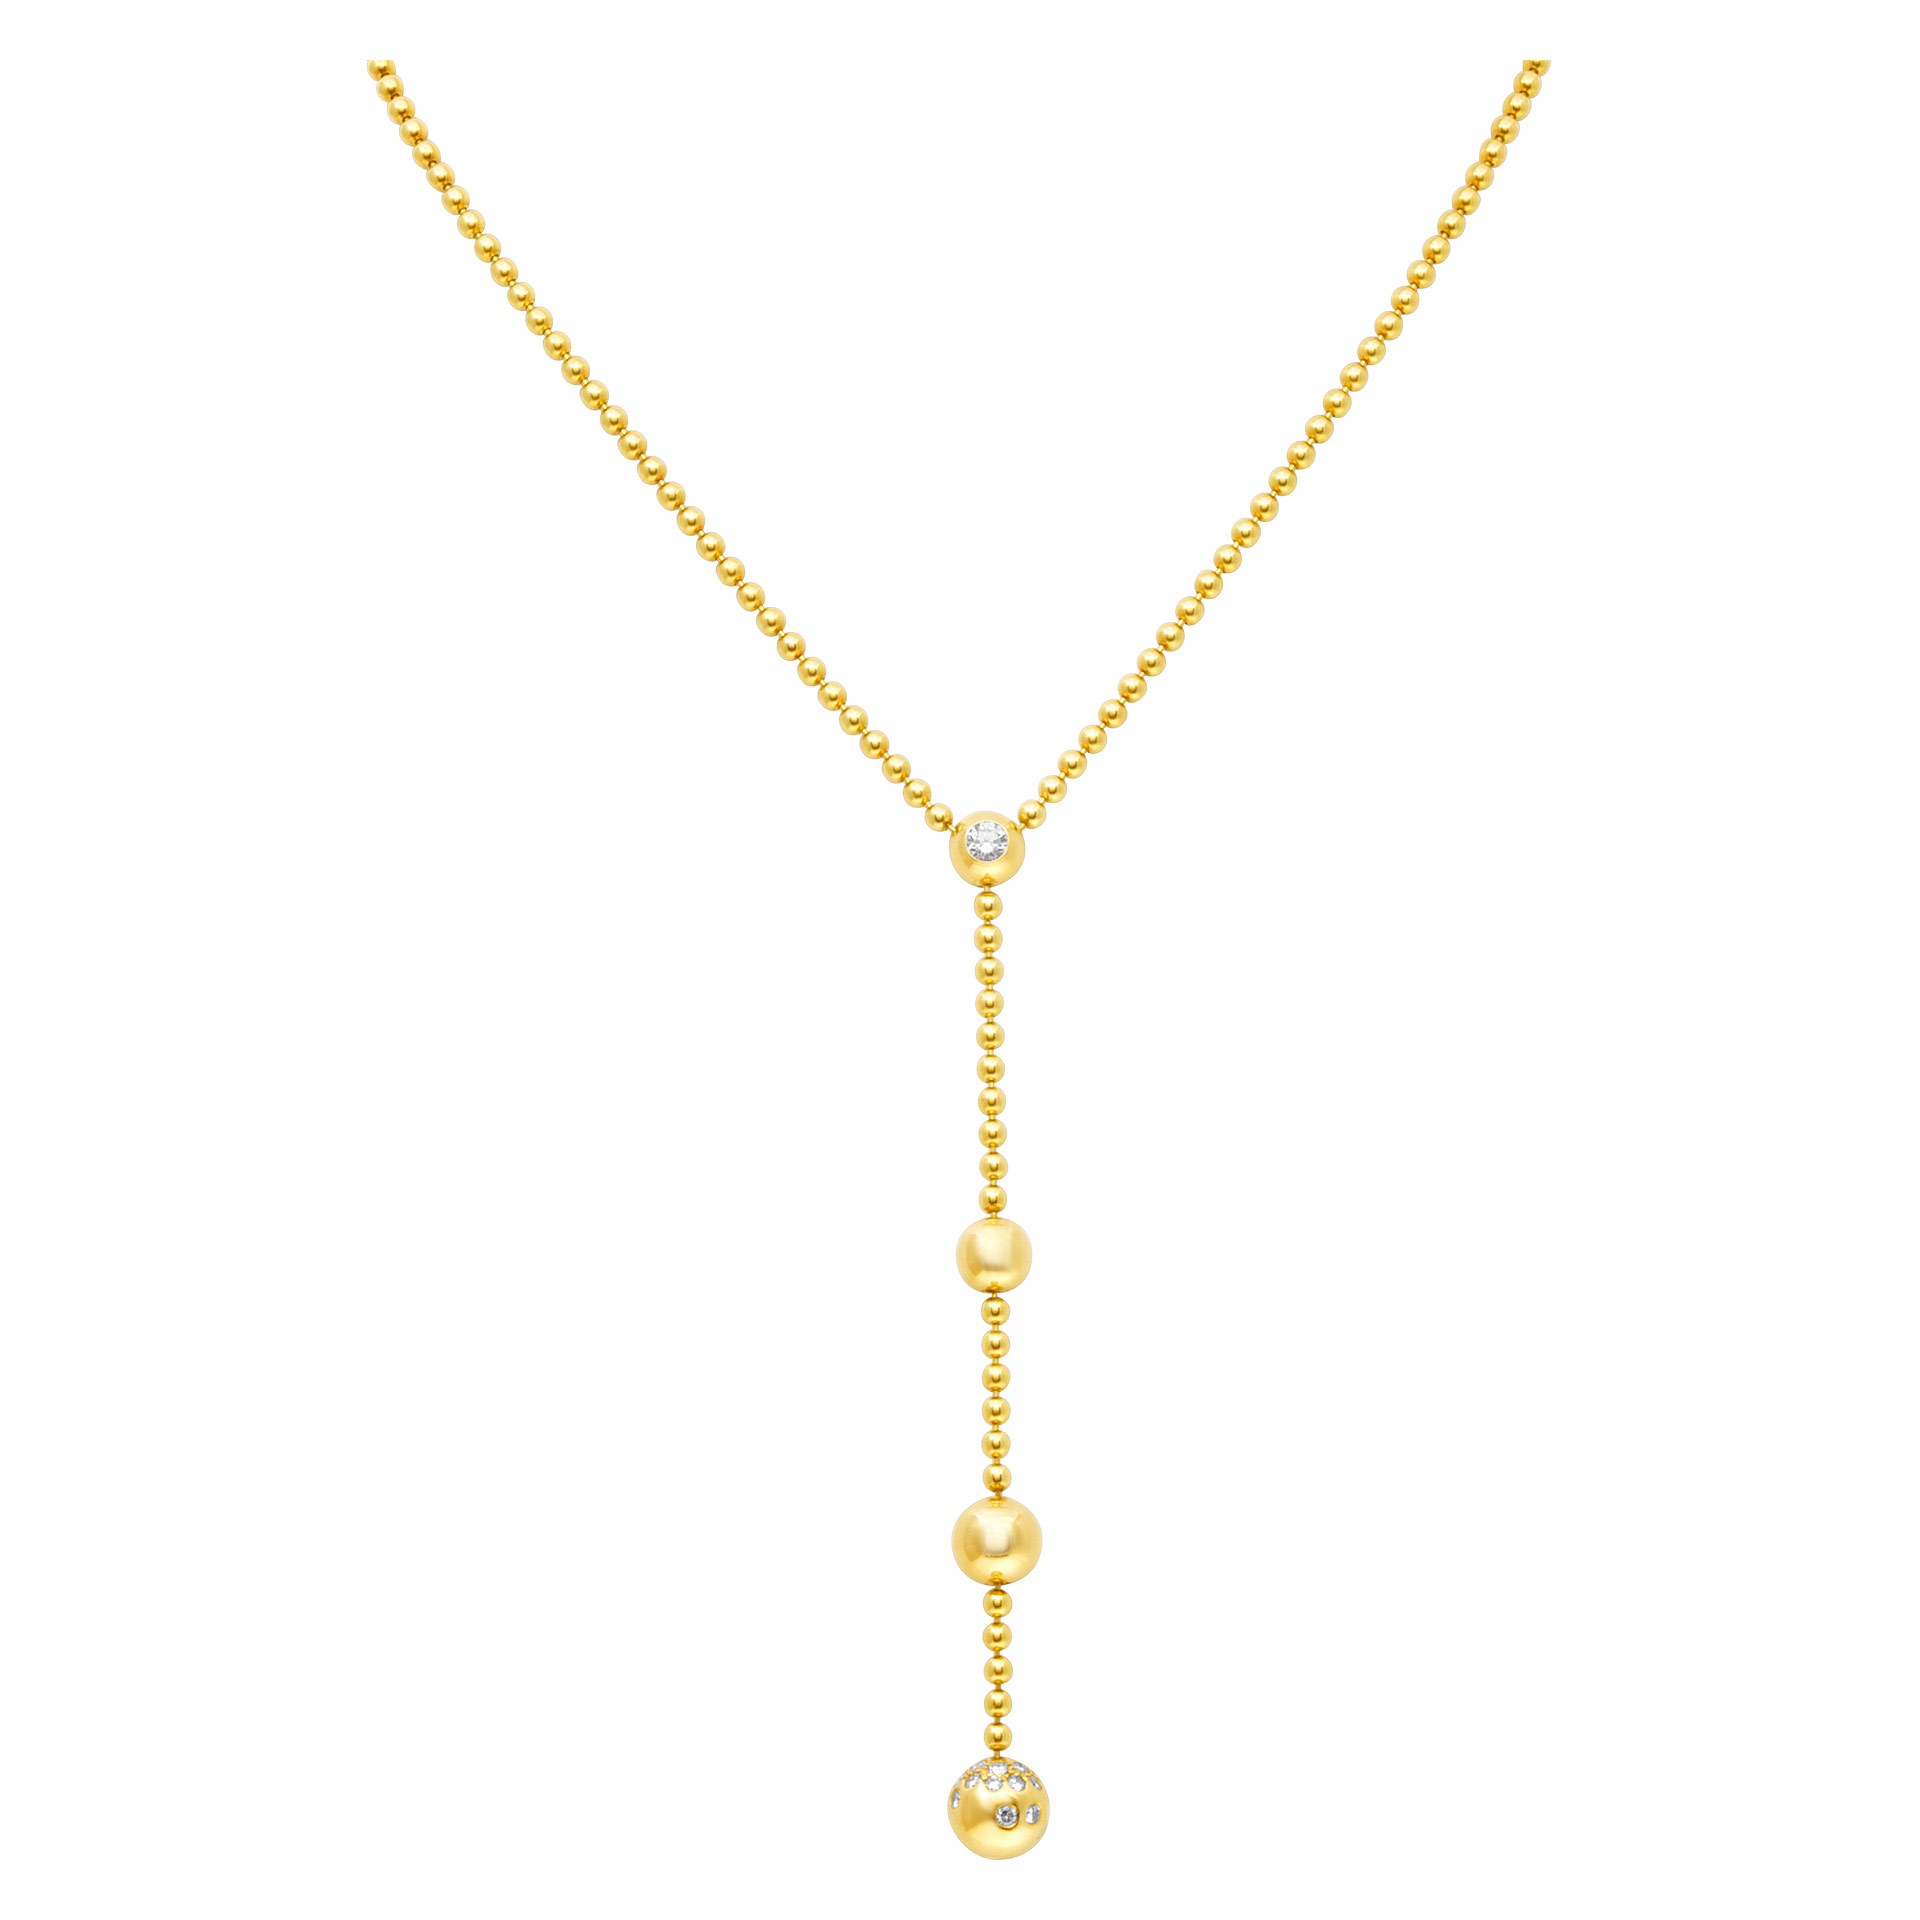 Cartier "Pluie de Diamants" collection, necklace with diamond accents in 18K yellow gold